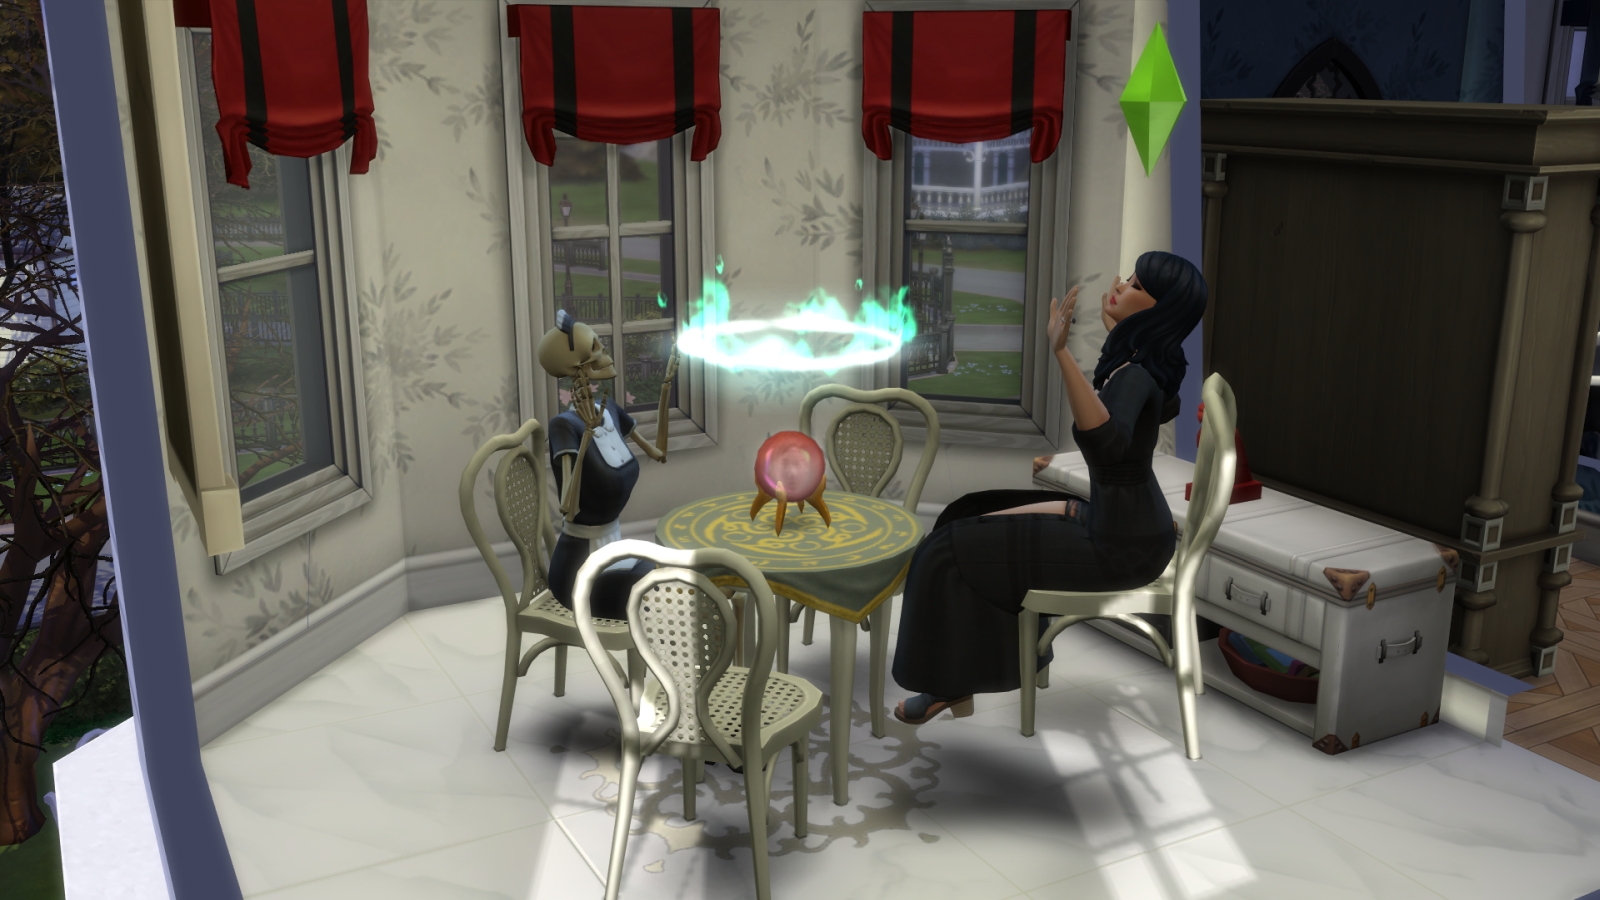 the sims 4 spooky hokidqy stufd pack review